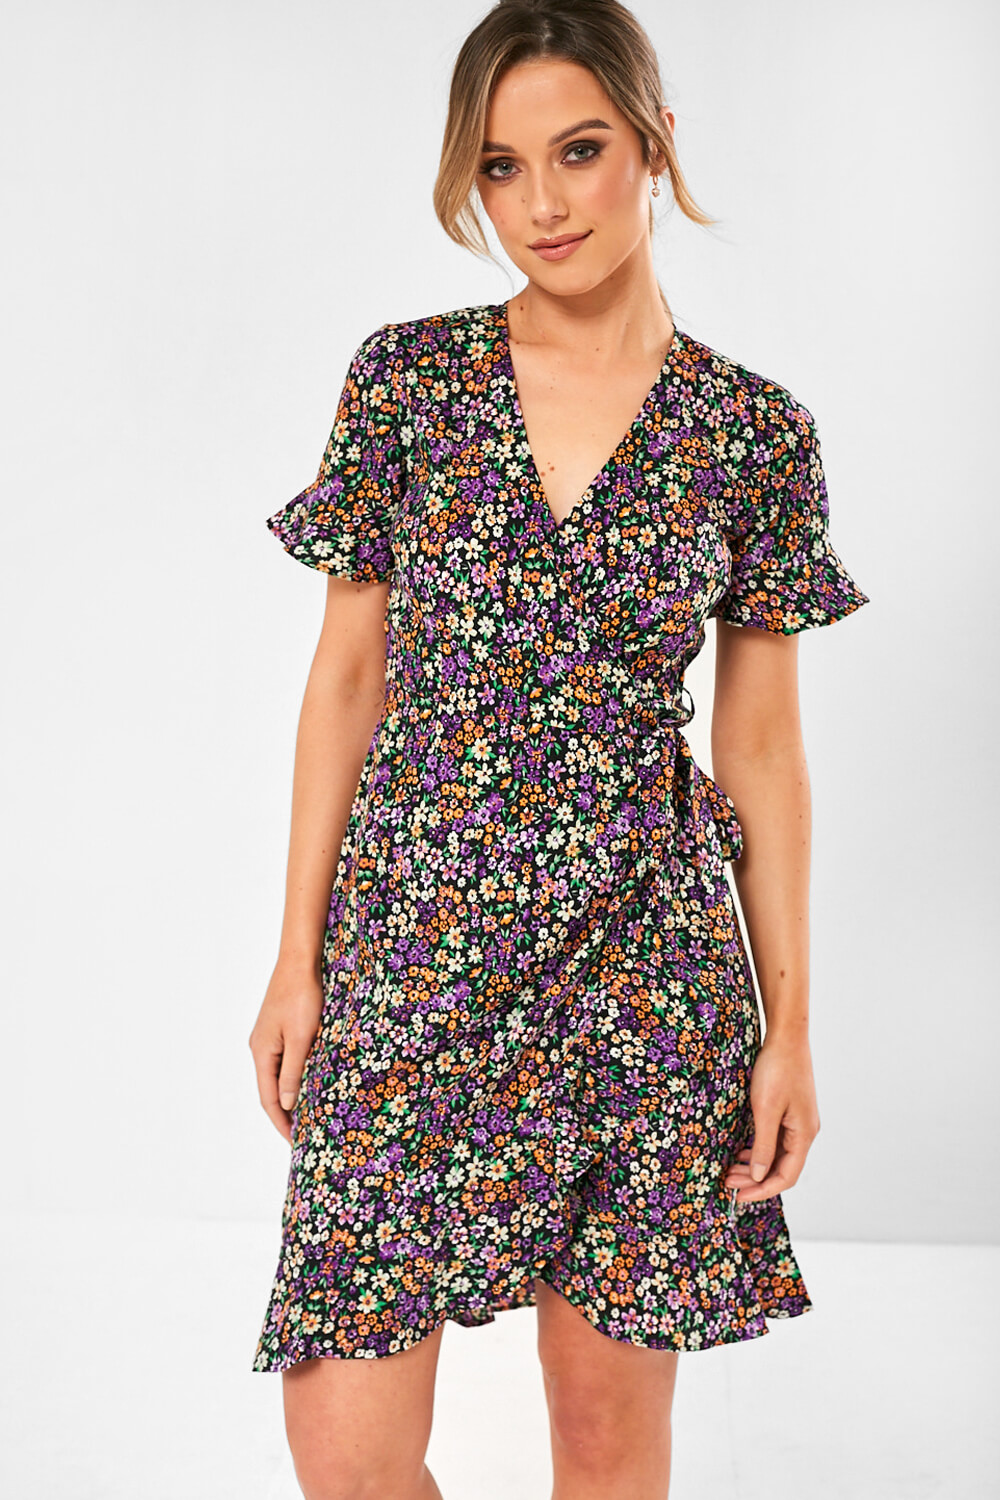 Only Olivia Floral Print Dress in Black | iCLOTHING - iCLOTHING